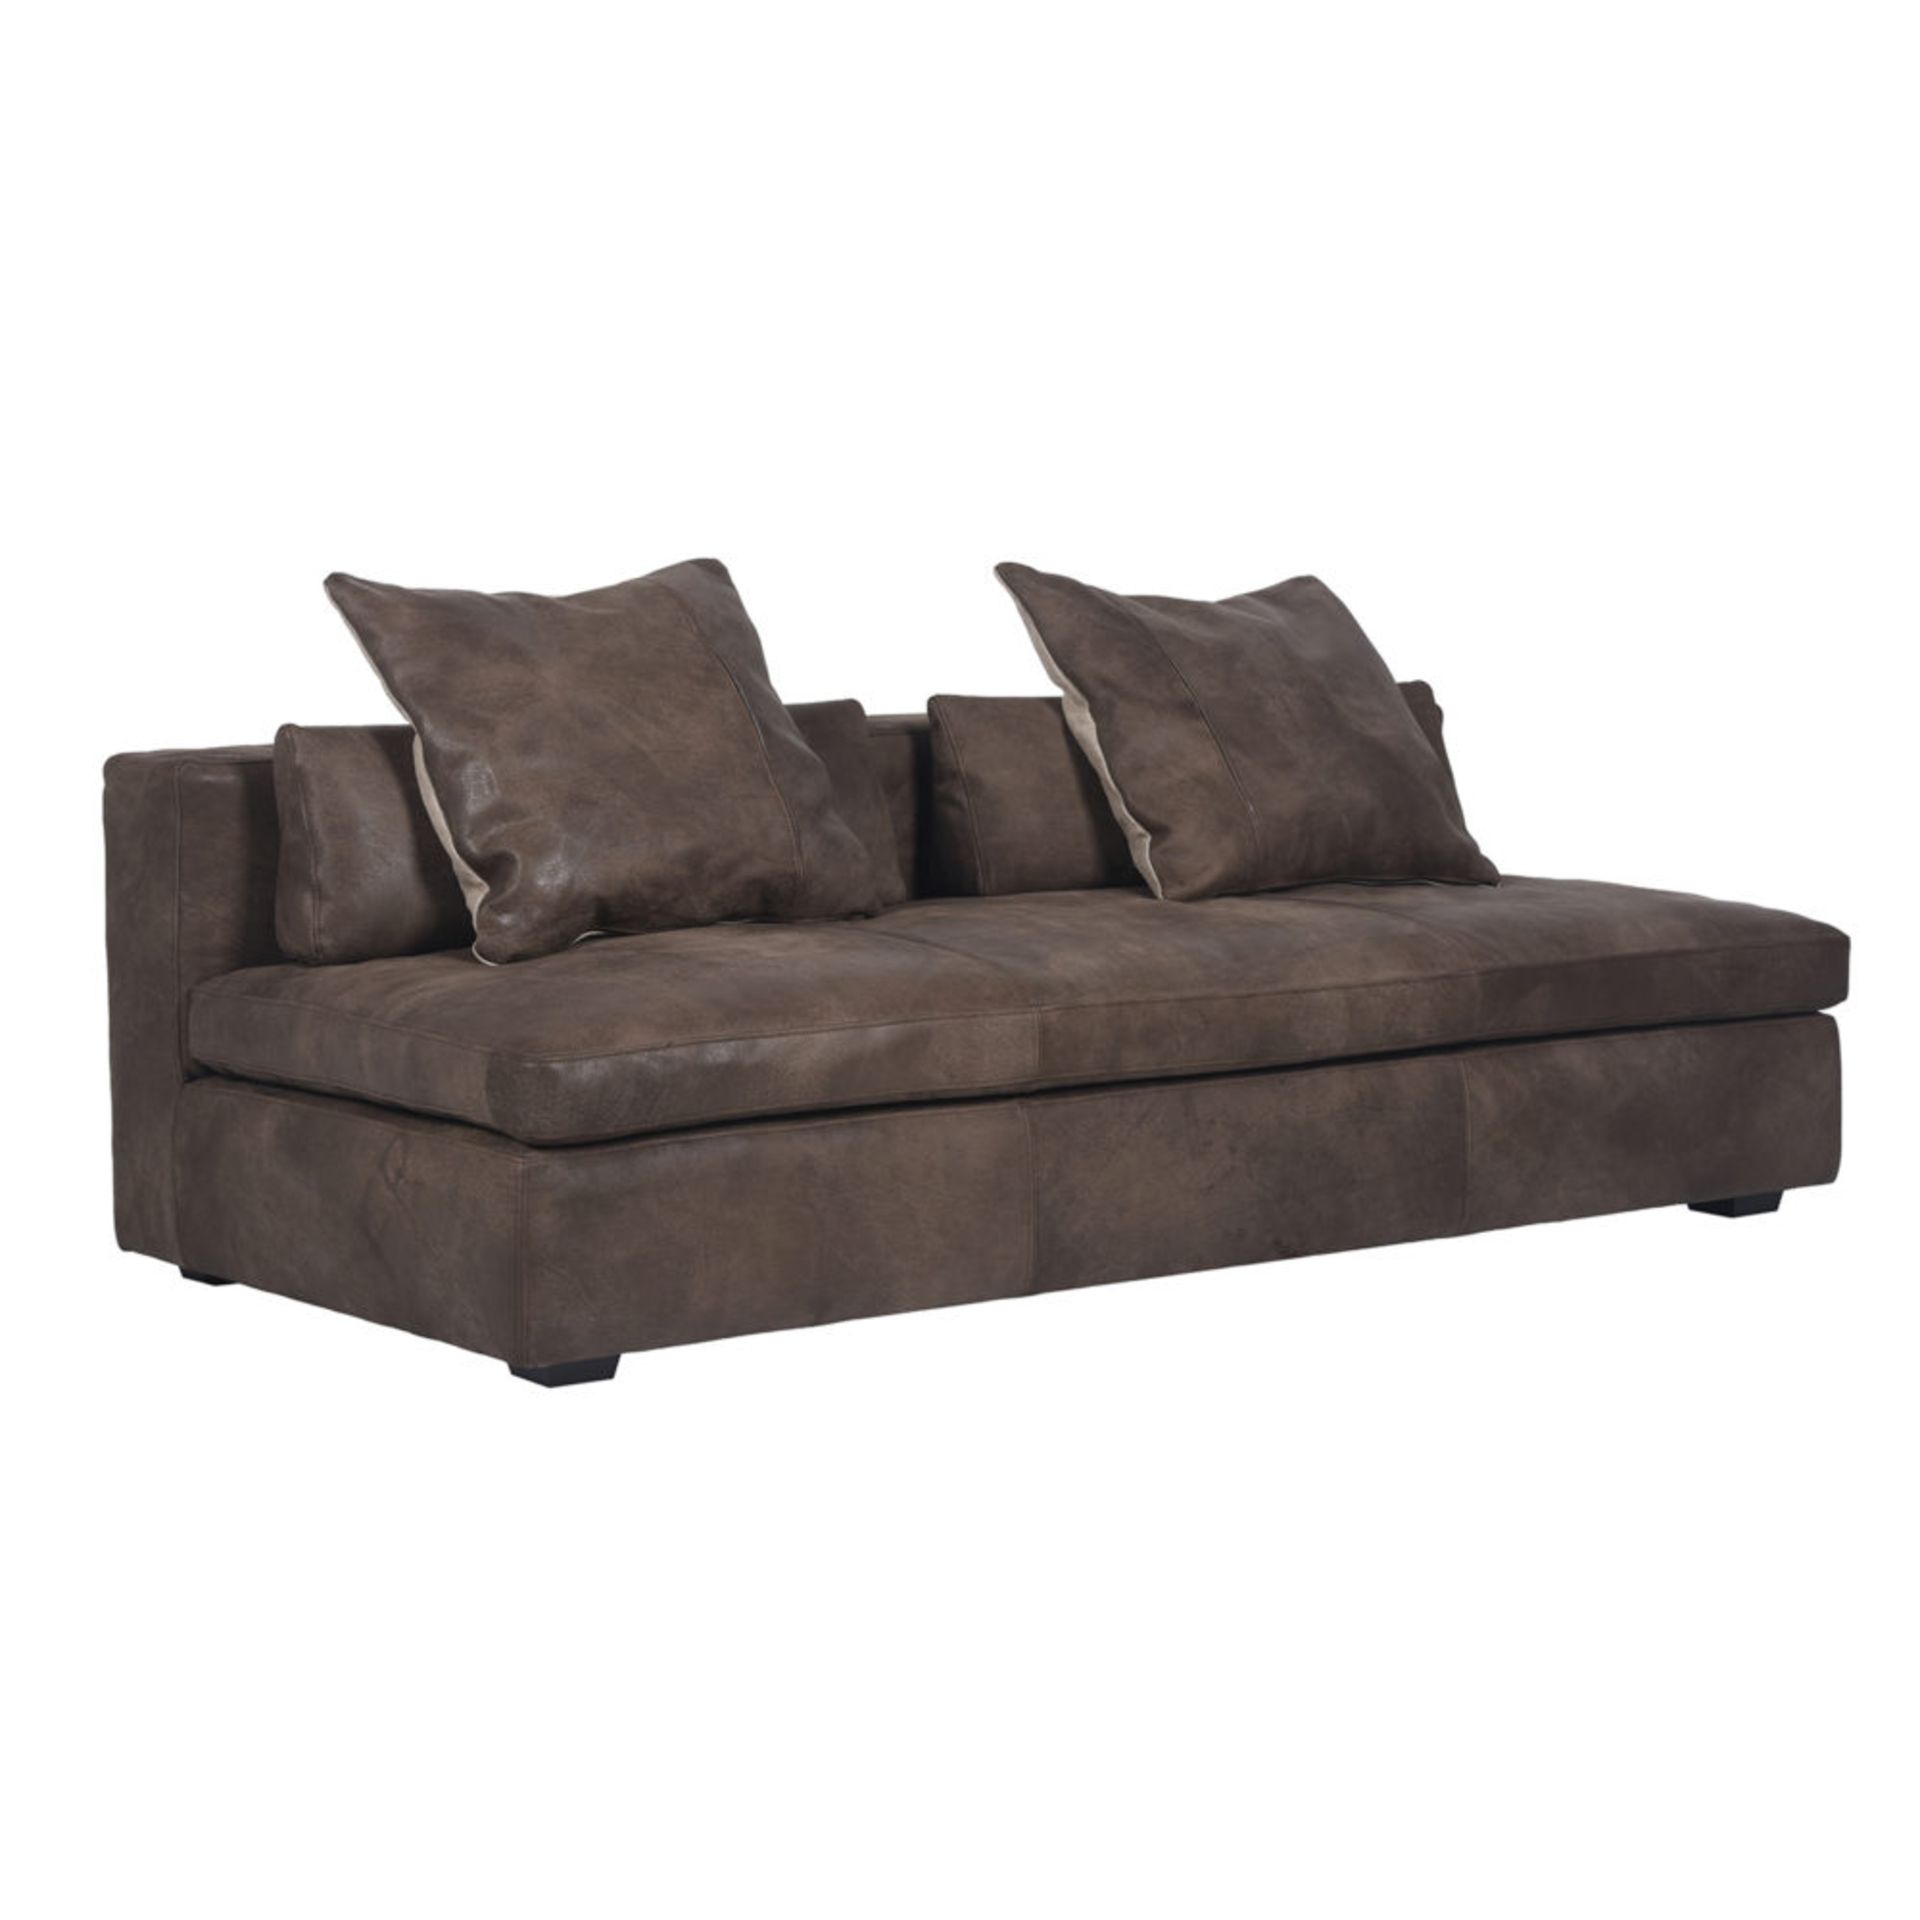 Bleu Nature Cochise Sectional Sofa 3 Seater Pawnee Tobacco, Sioux Black Leather 202 X 99 X 42cm - Image 2 of 2